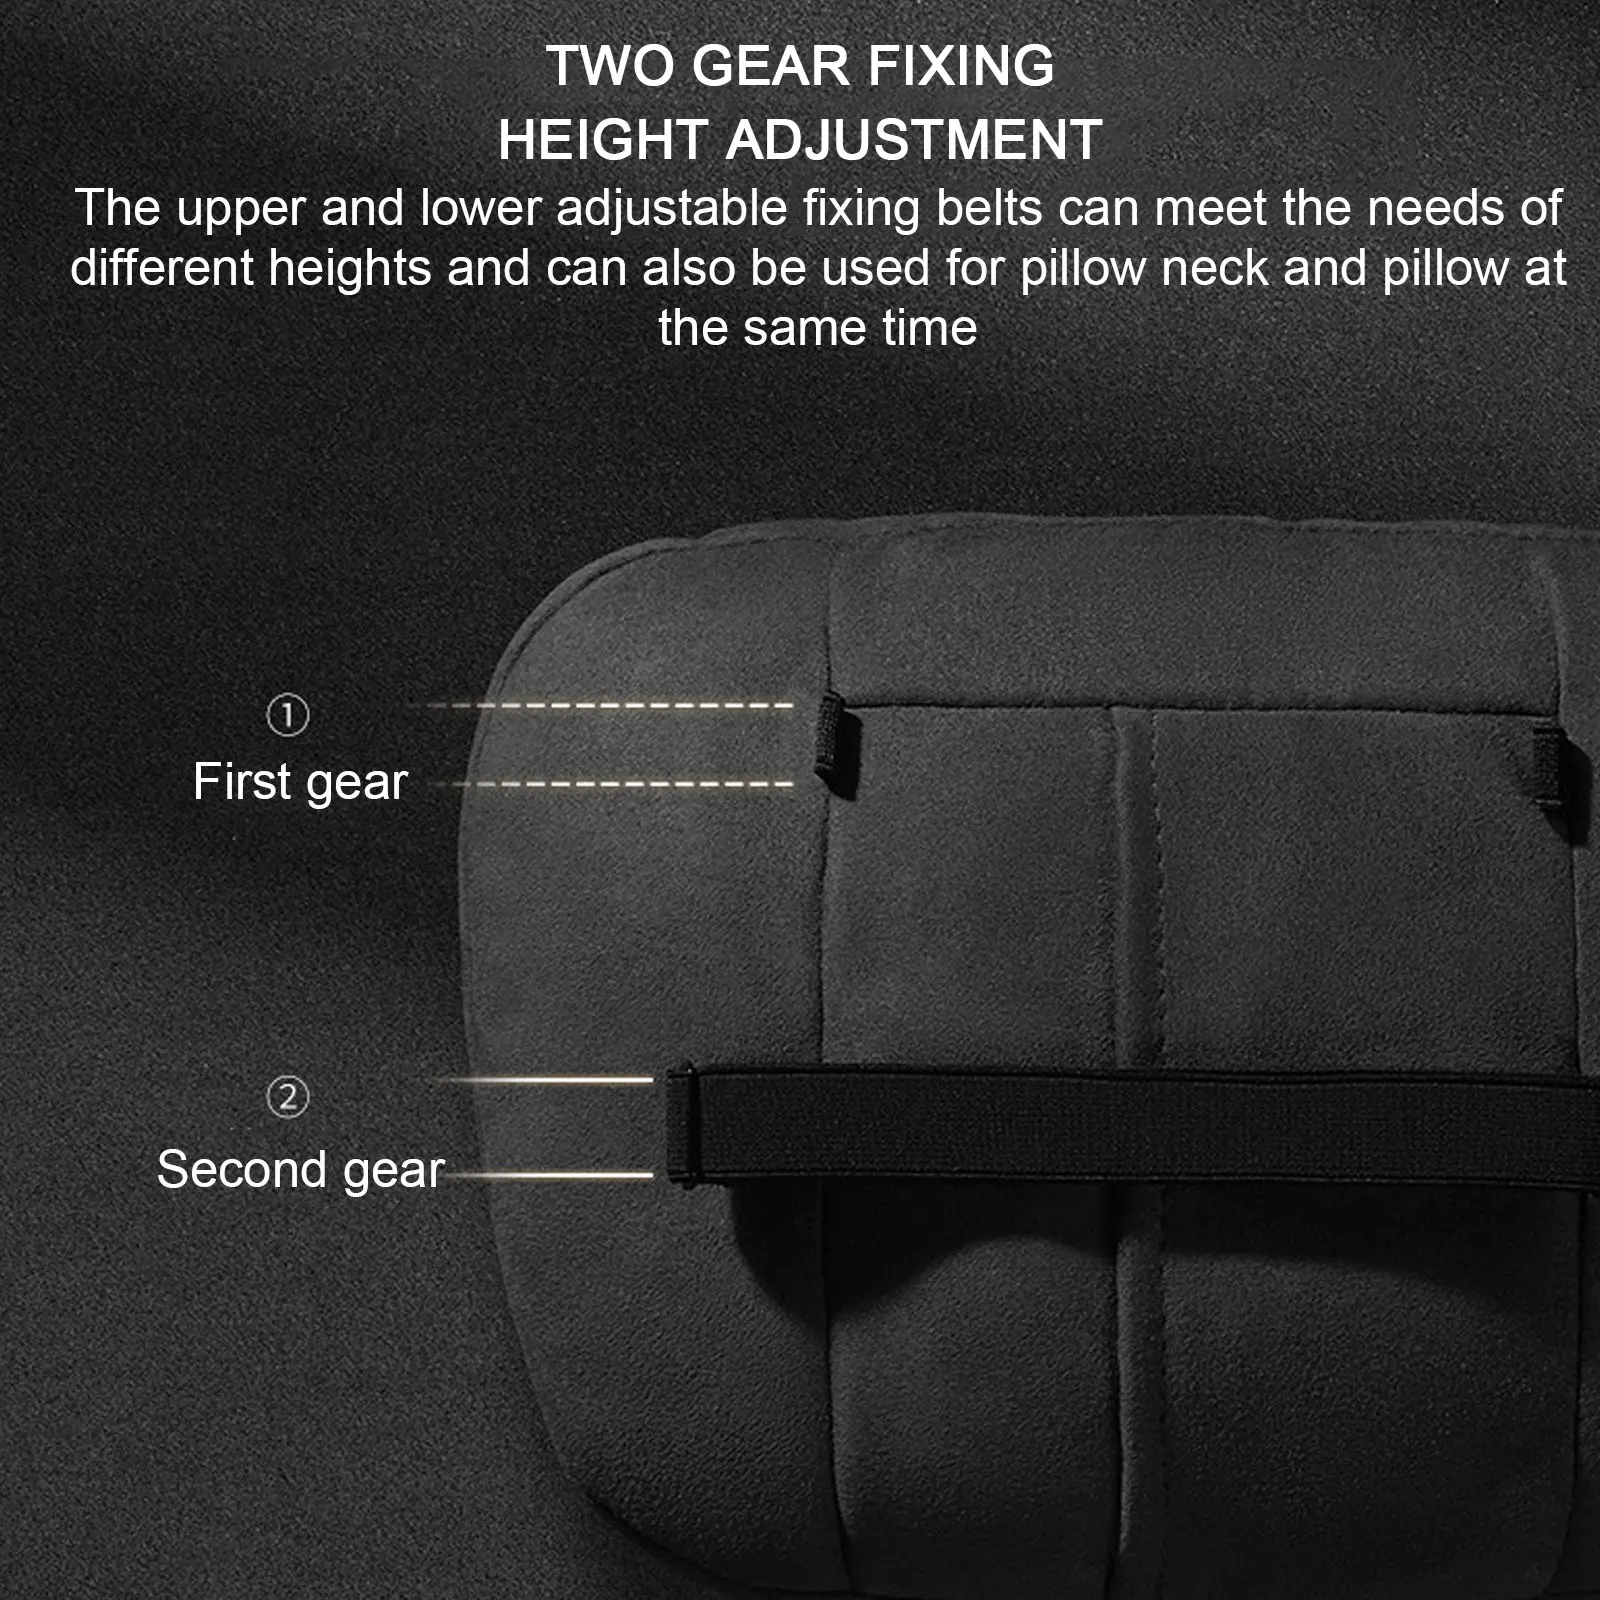 Brand New Car Seat Booster Universal Driver Memory Foam Lumbar Pillow Suede  Seat Height Inclined Cushion Car - AliExpress